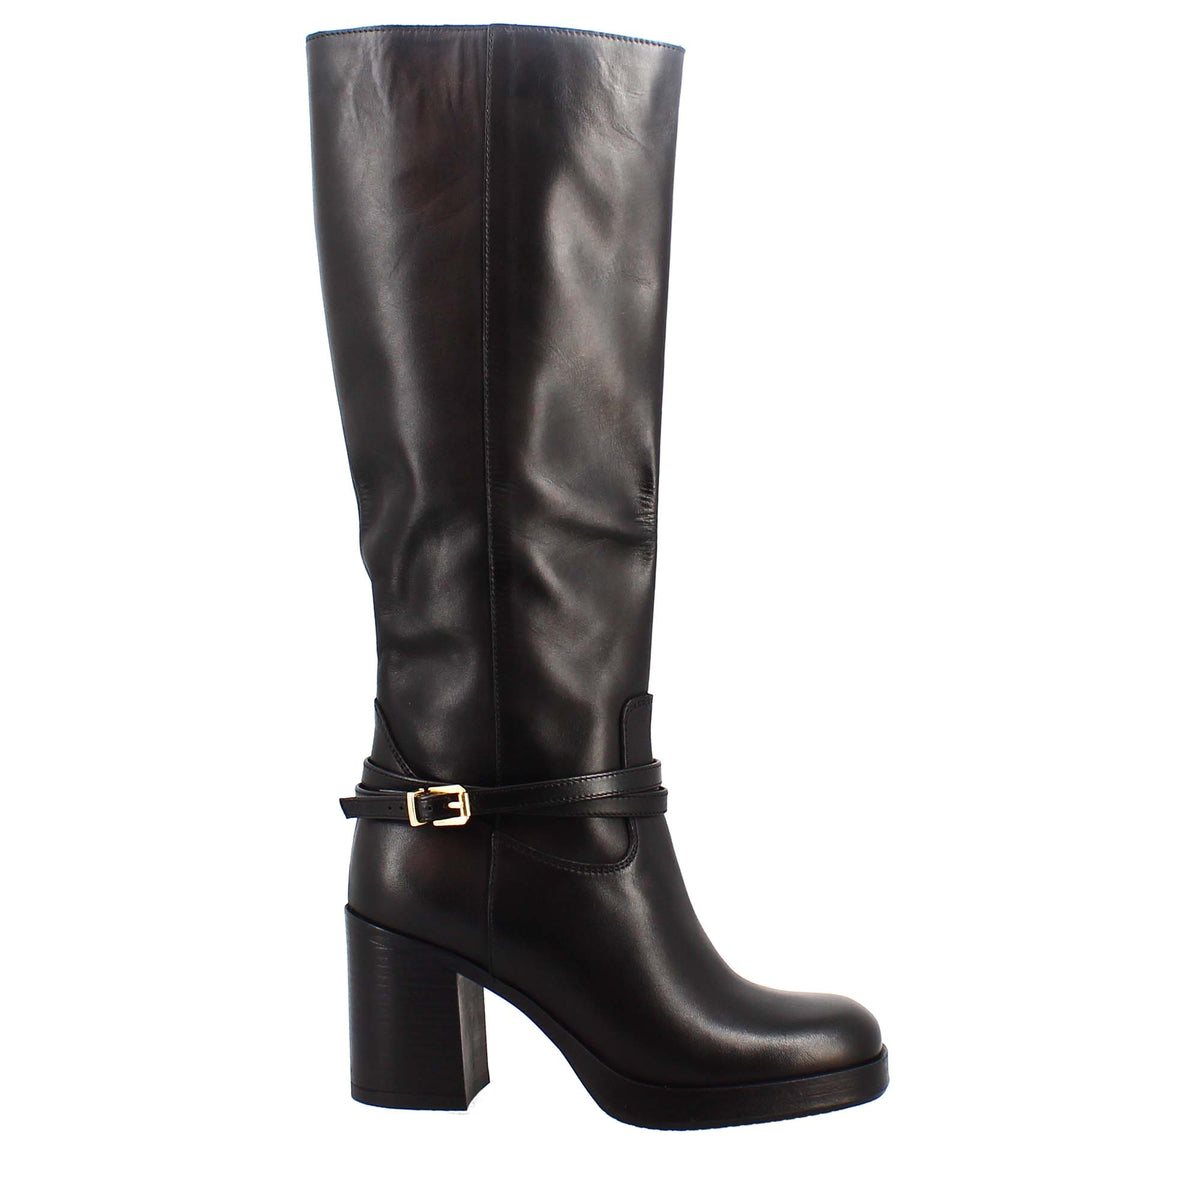 Women's boot with heel in black leather and platform sole